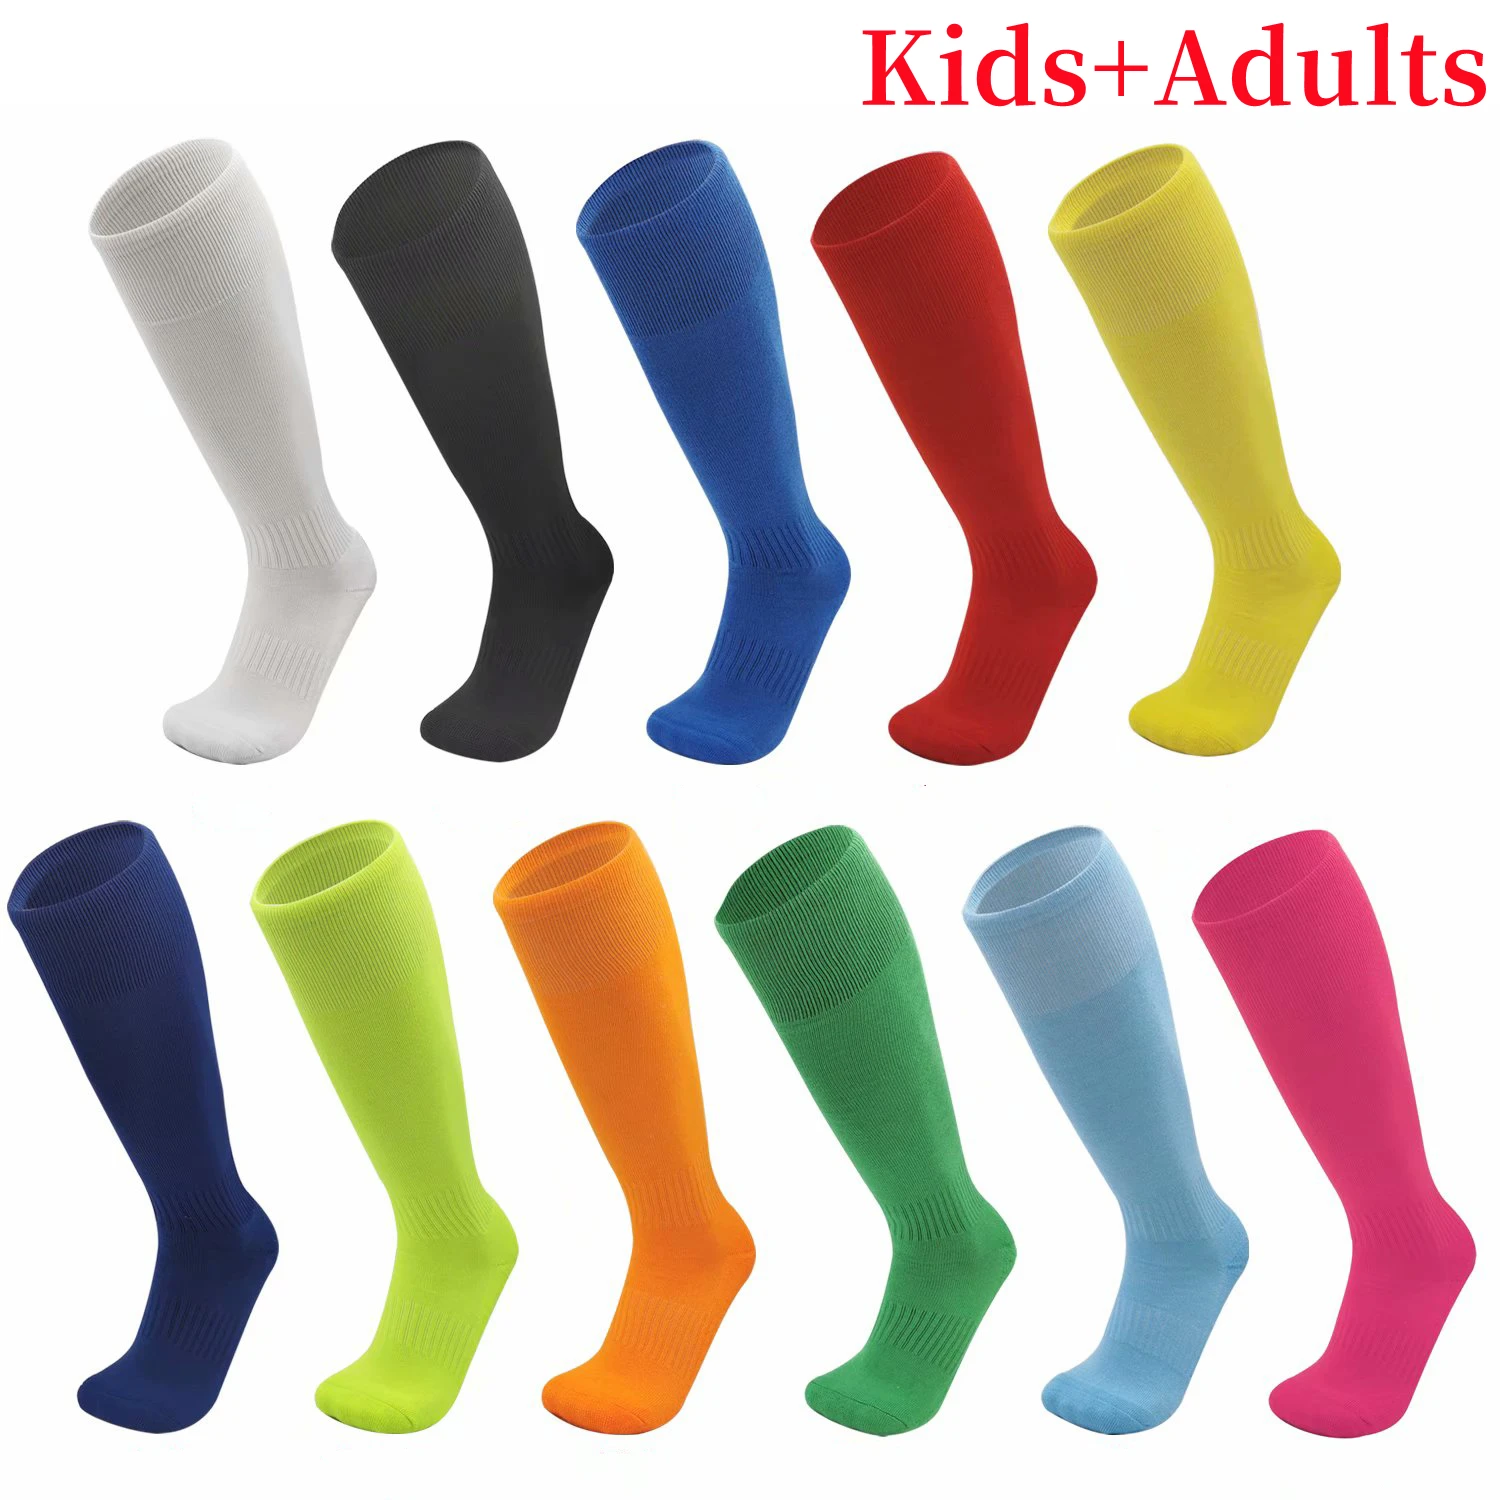 

Outdoor Football Breathable Soccer Sports Socks Rugby Stockings Over Knee High Volleyball Baseball Hockey Kids Adults Long Socks